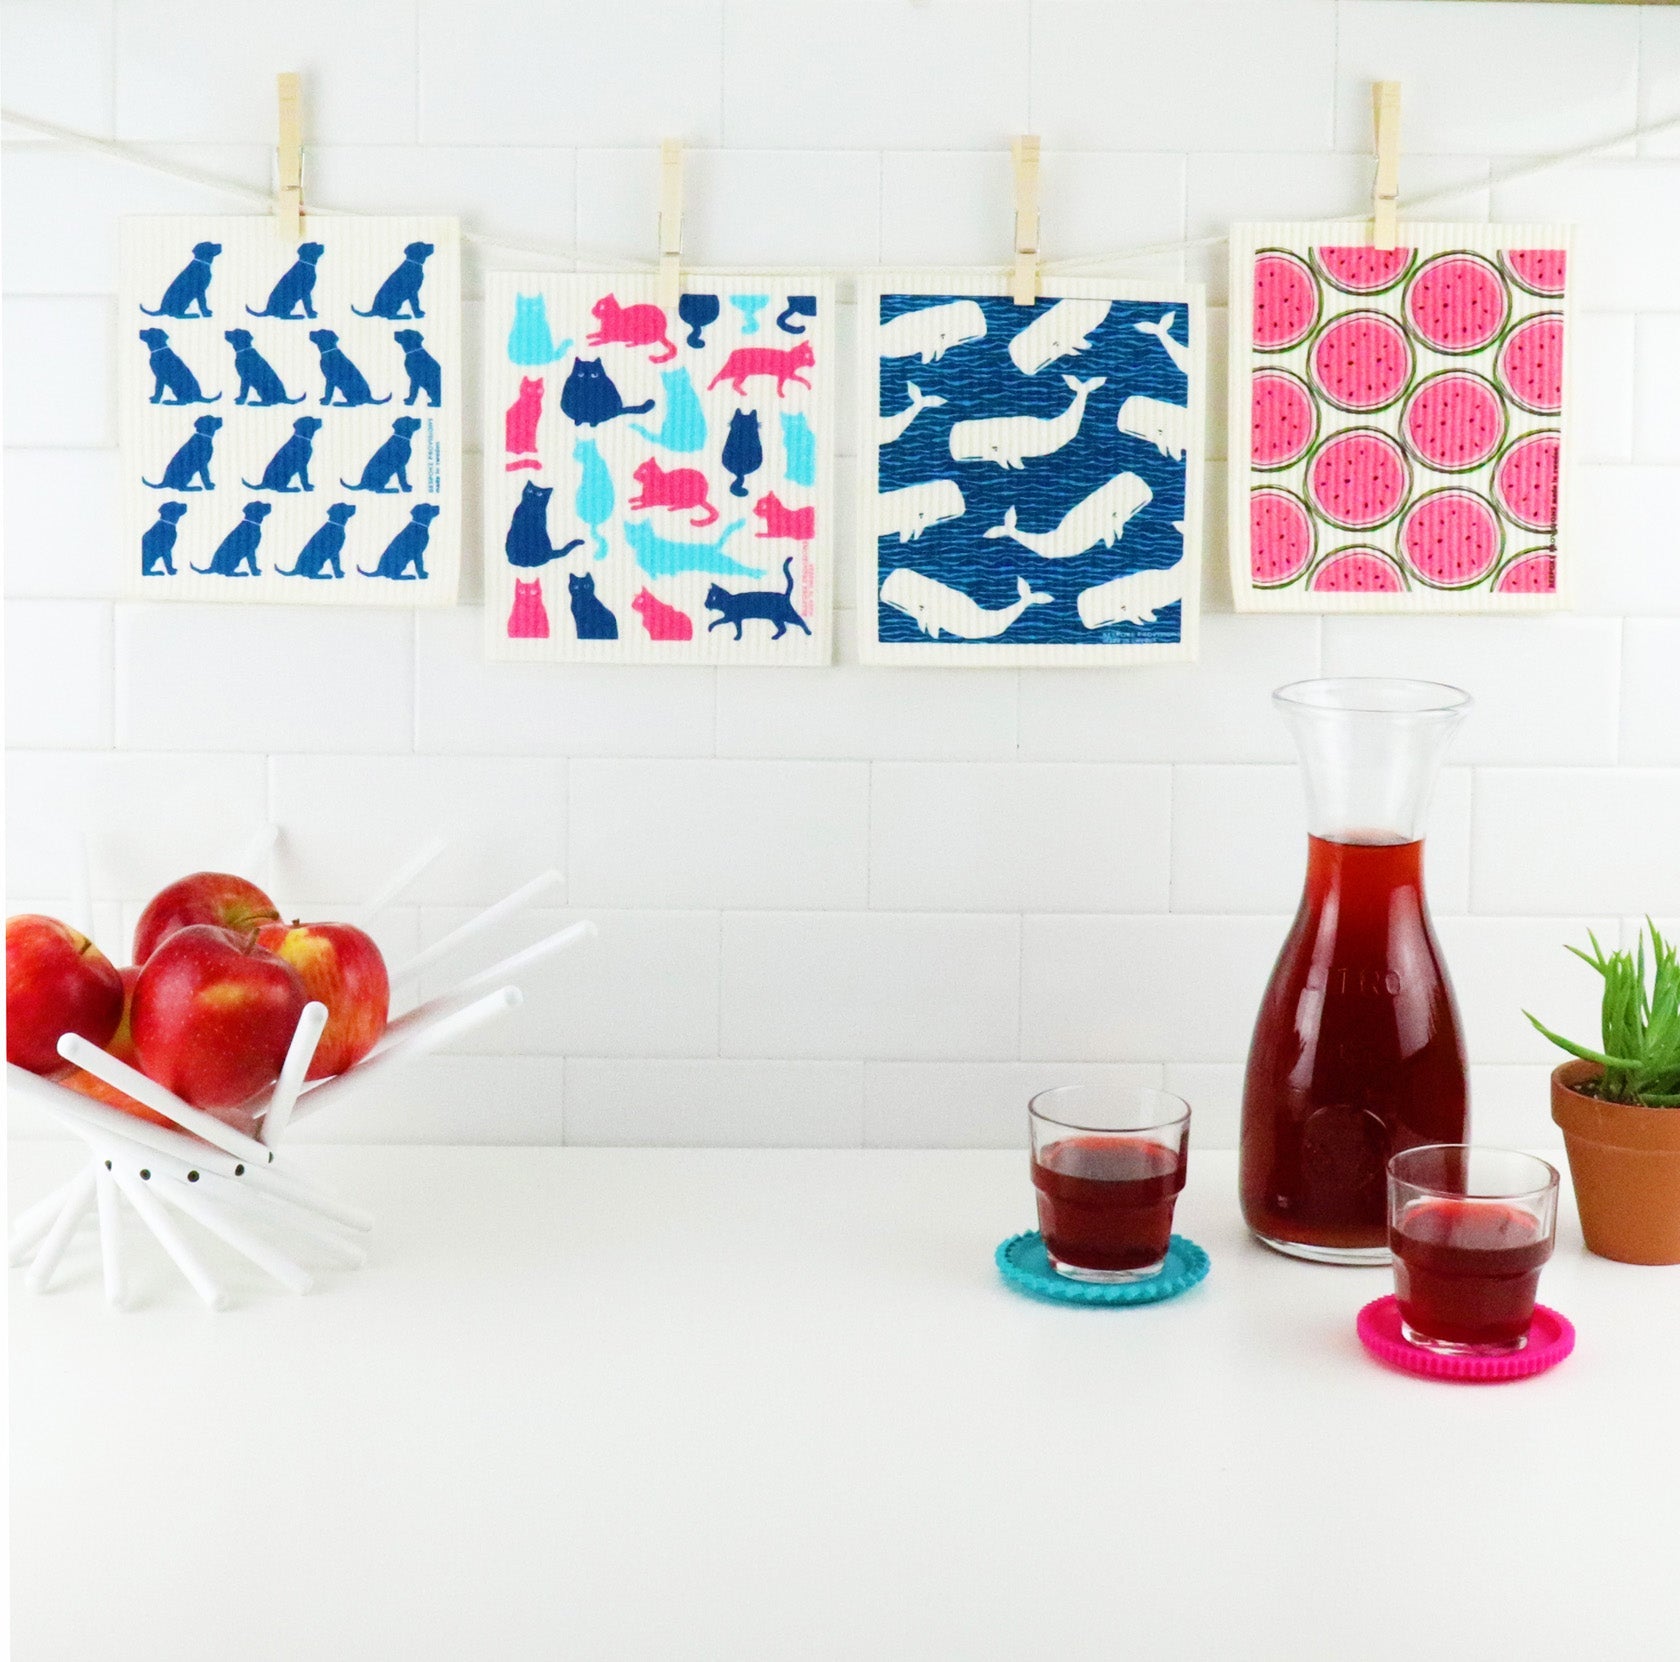 Dogs, Cats, Whales and Watermelon Swedish Dishcloths hanging with clothespins  - BESPOKE PROVISIONS